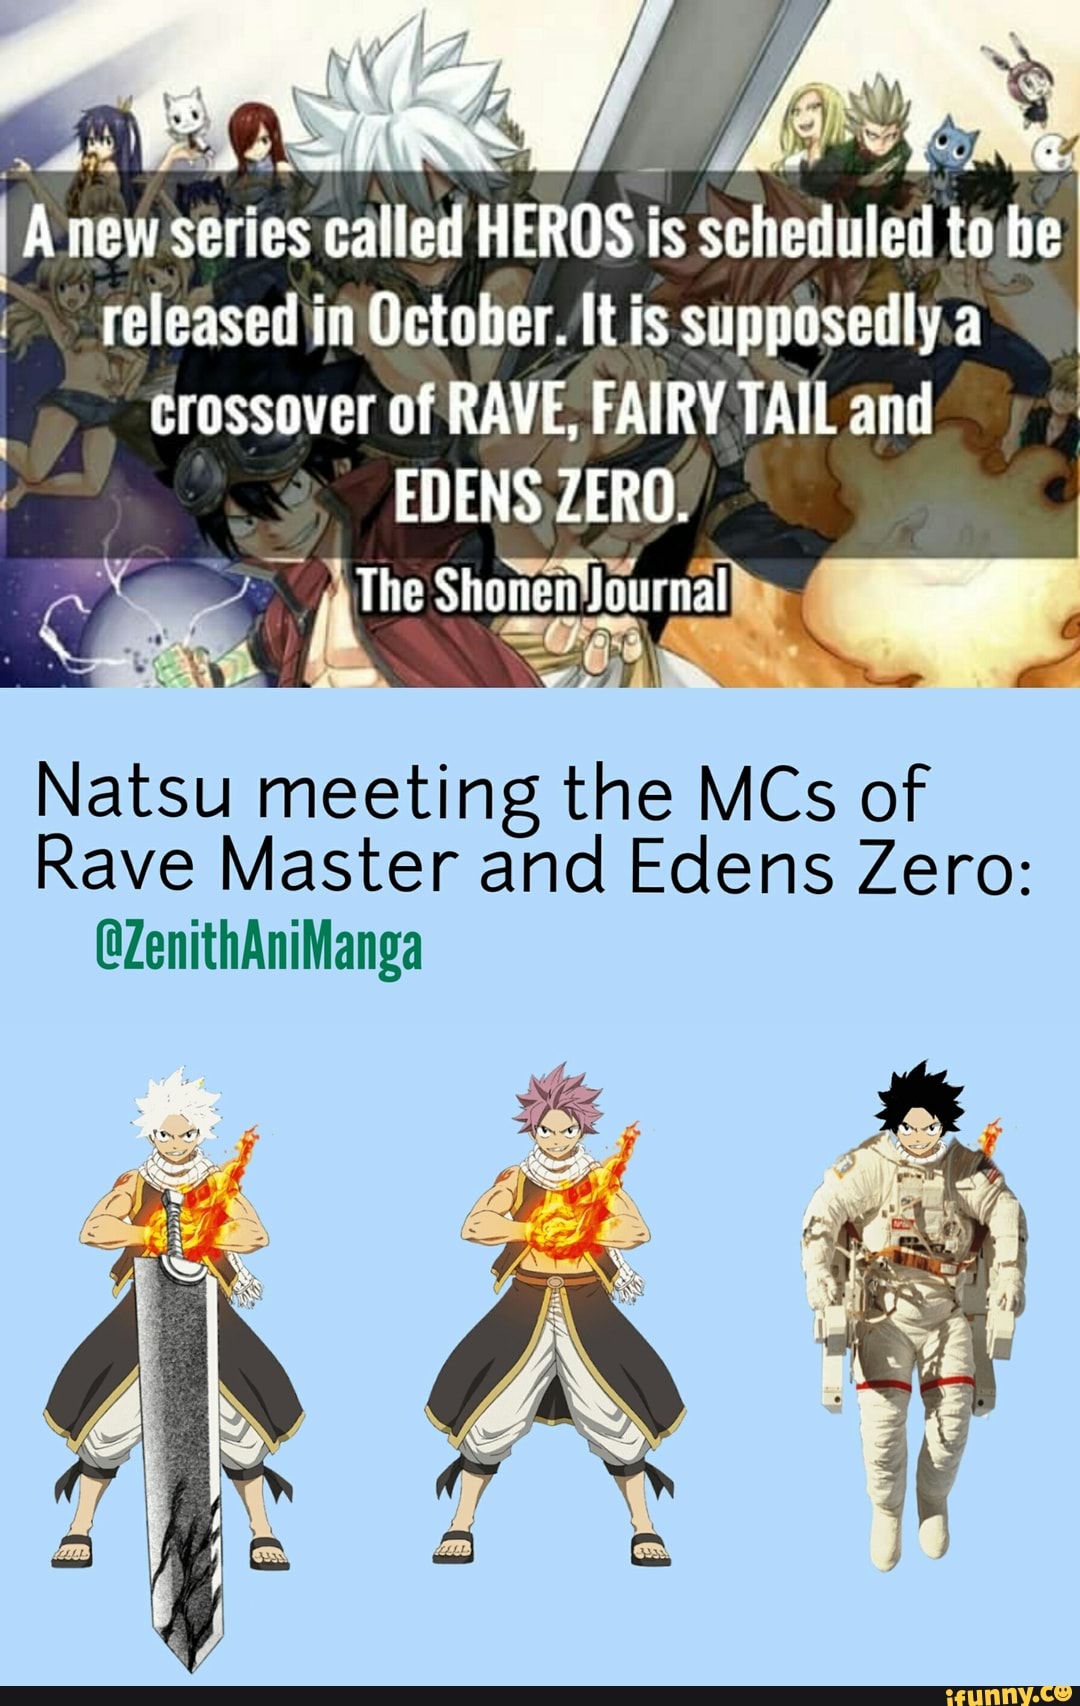 A New Series Called Herbs Is Scheduled To Be Released In October It Is Supposedly A Crossover Of Rave Fairy Tail And Edens Zero Natsu Meeting The Mcs Of Rave Master And